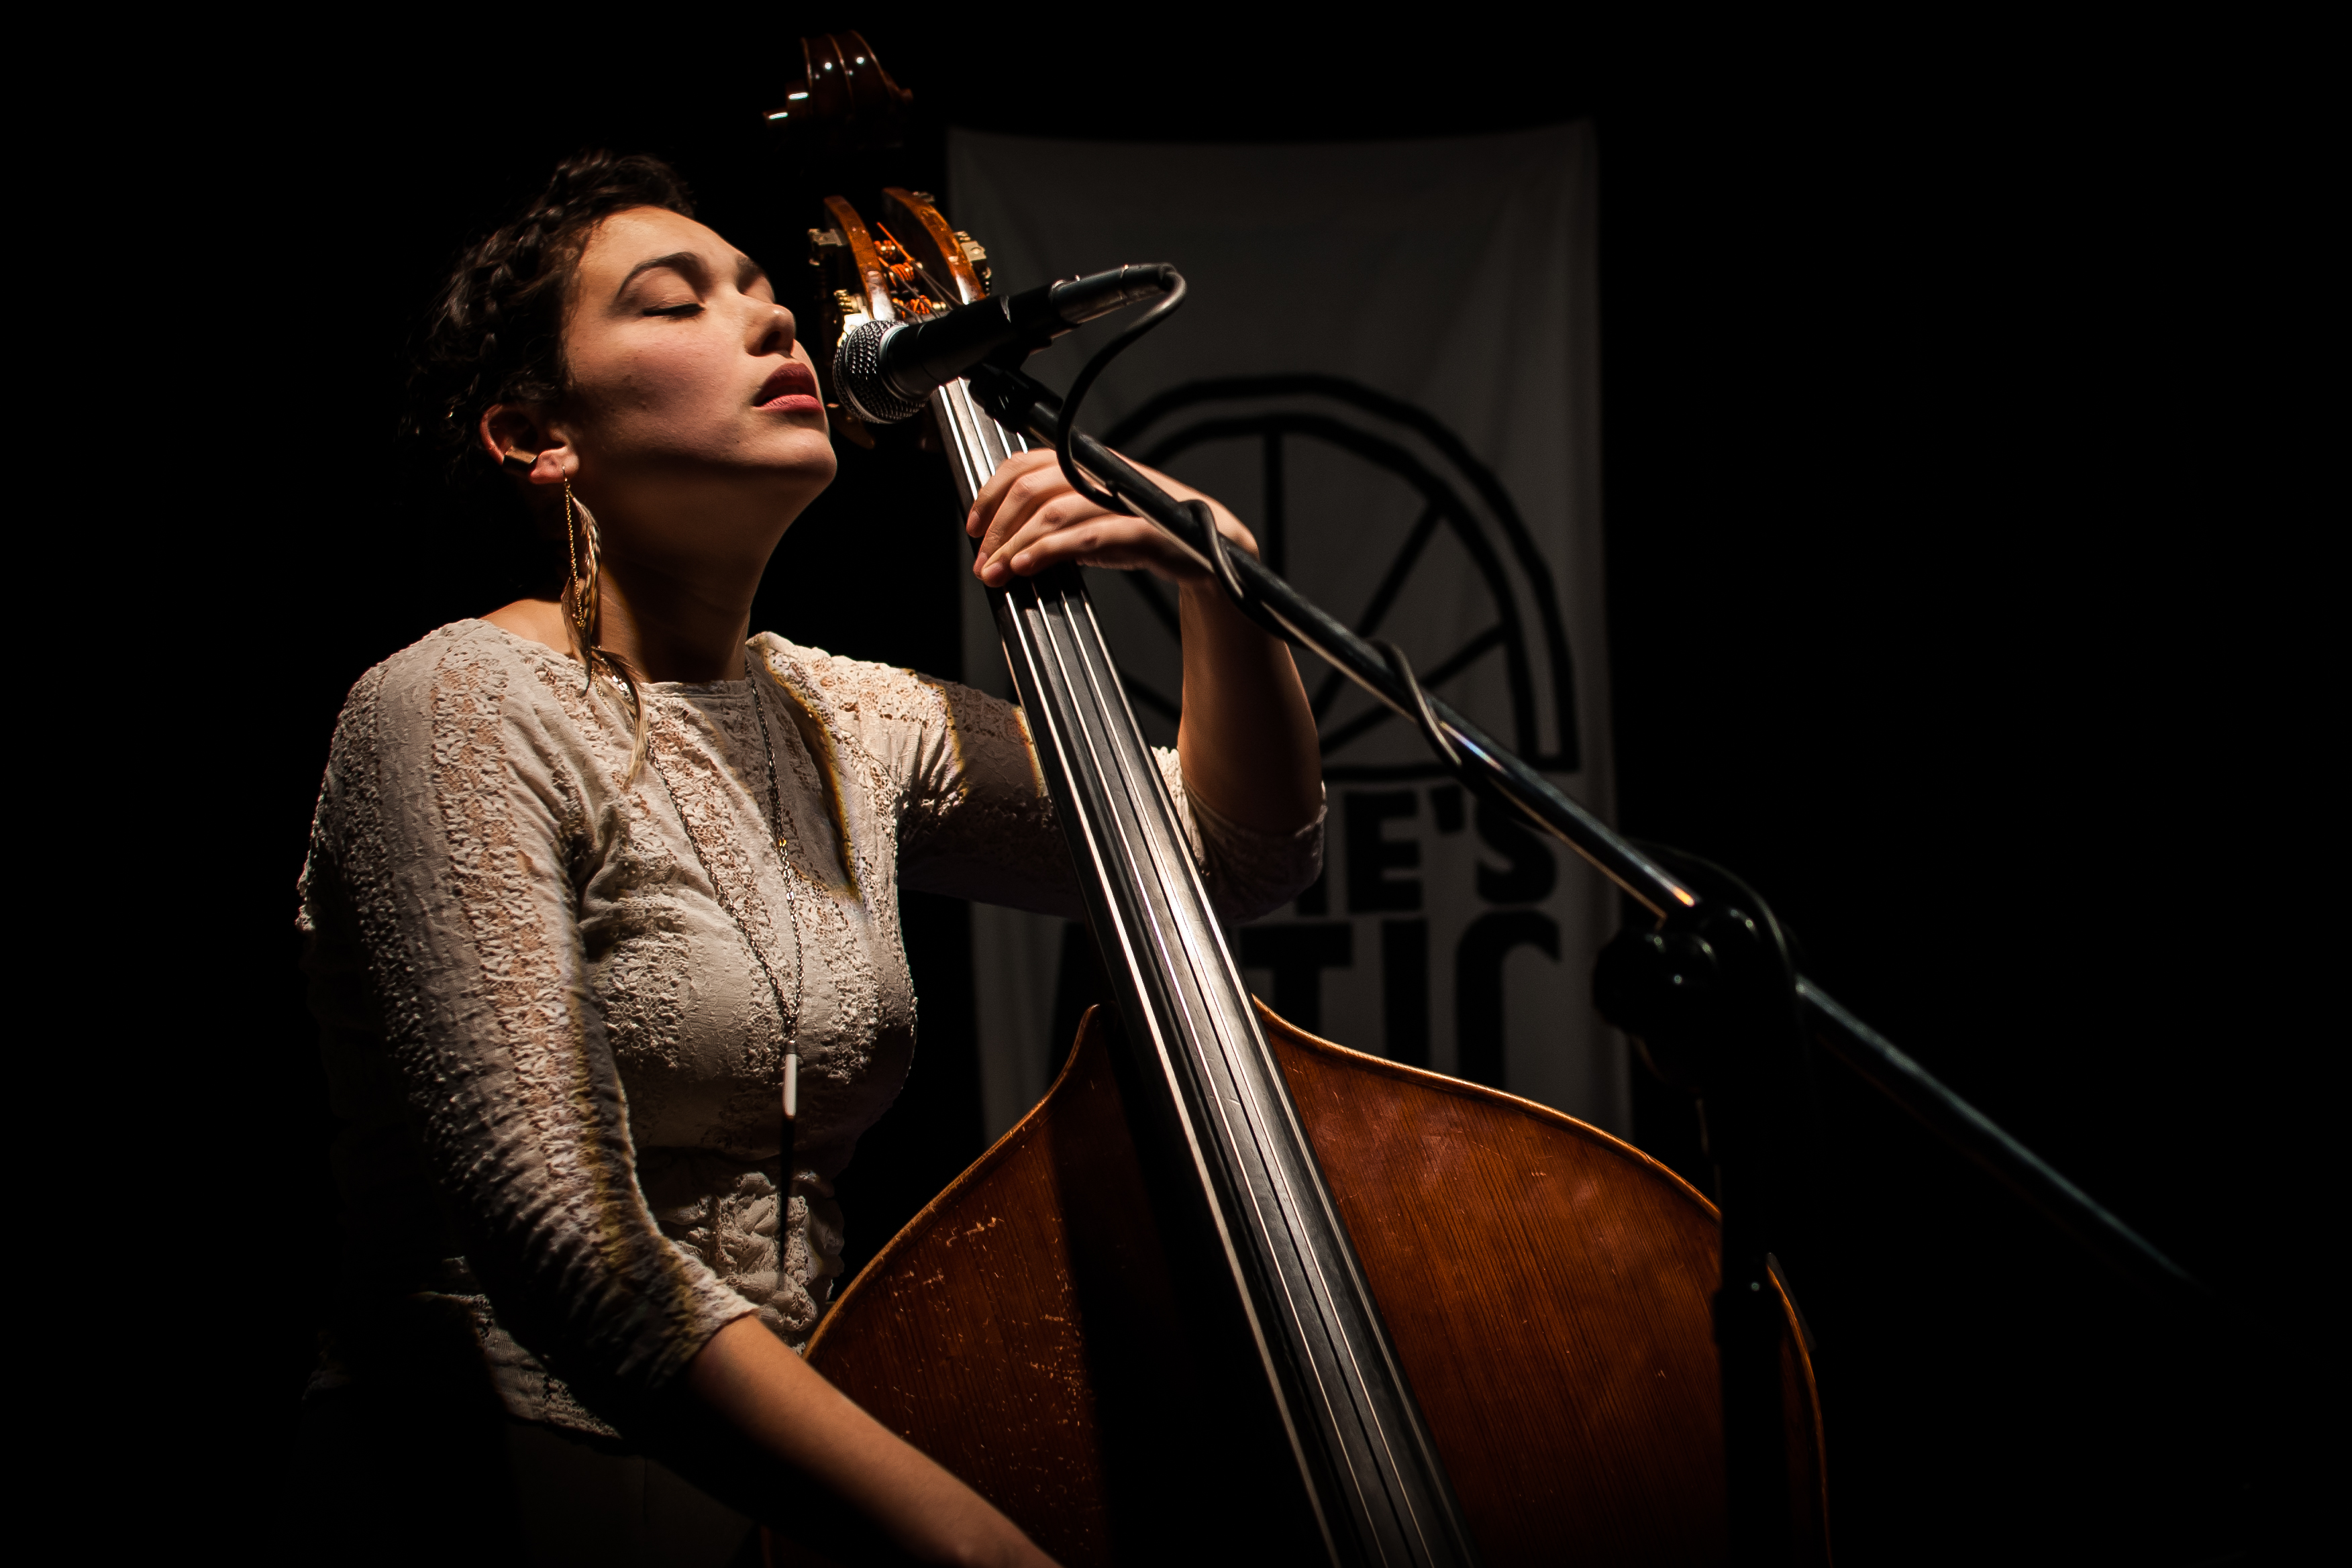 The lovely Andrea DeMarcus on upright bass